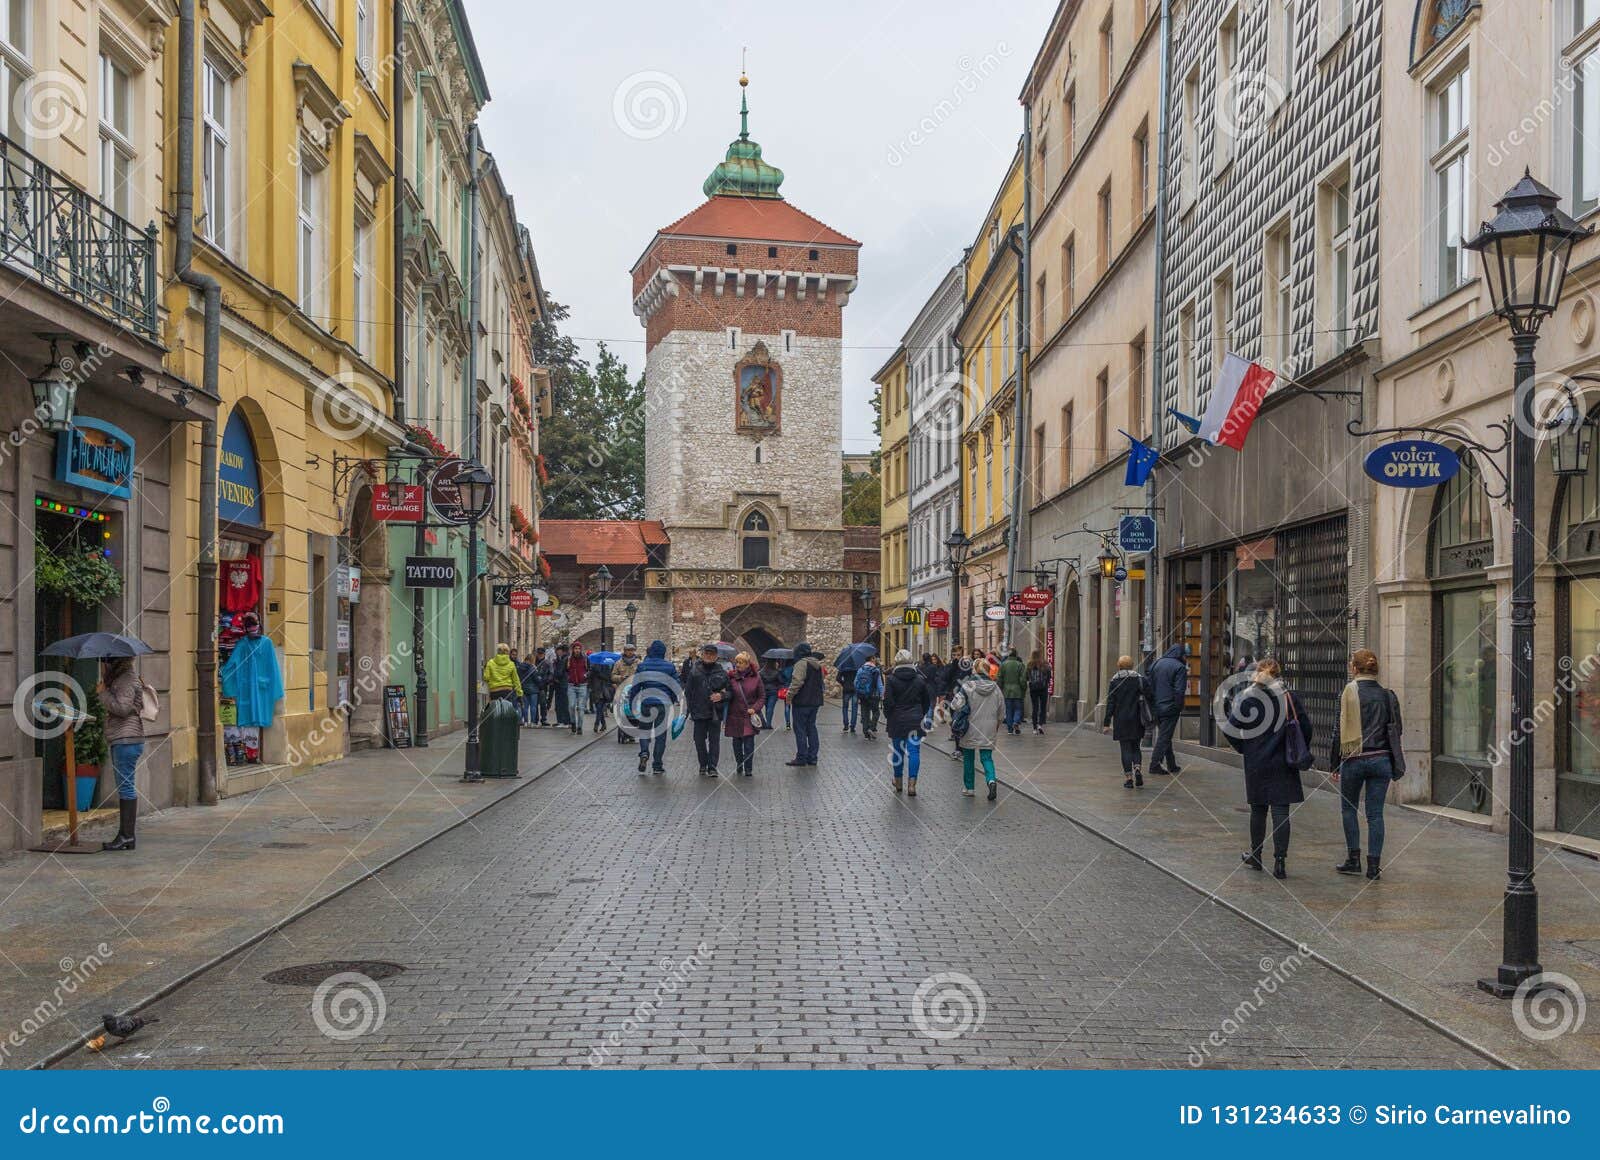 The Old Town Krakow Poland Editorial Stock Photo Image Of Beauty Culture 131234633